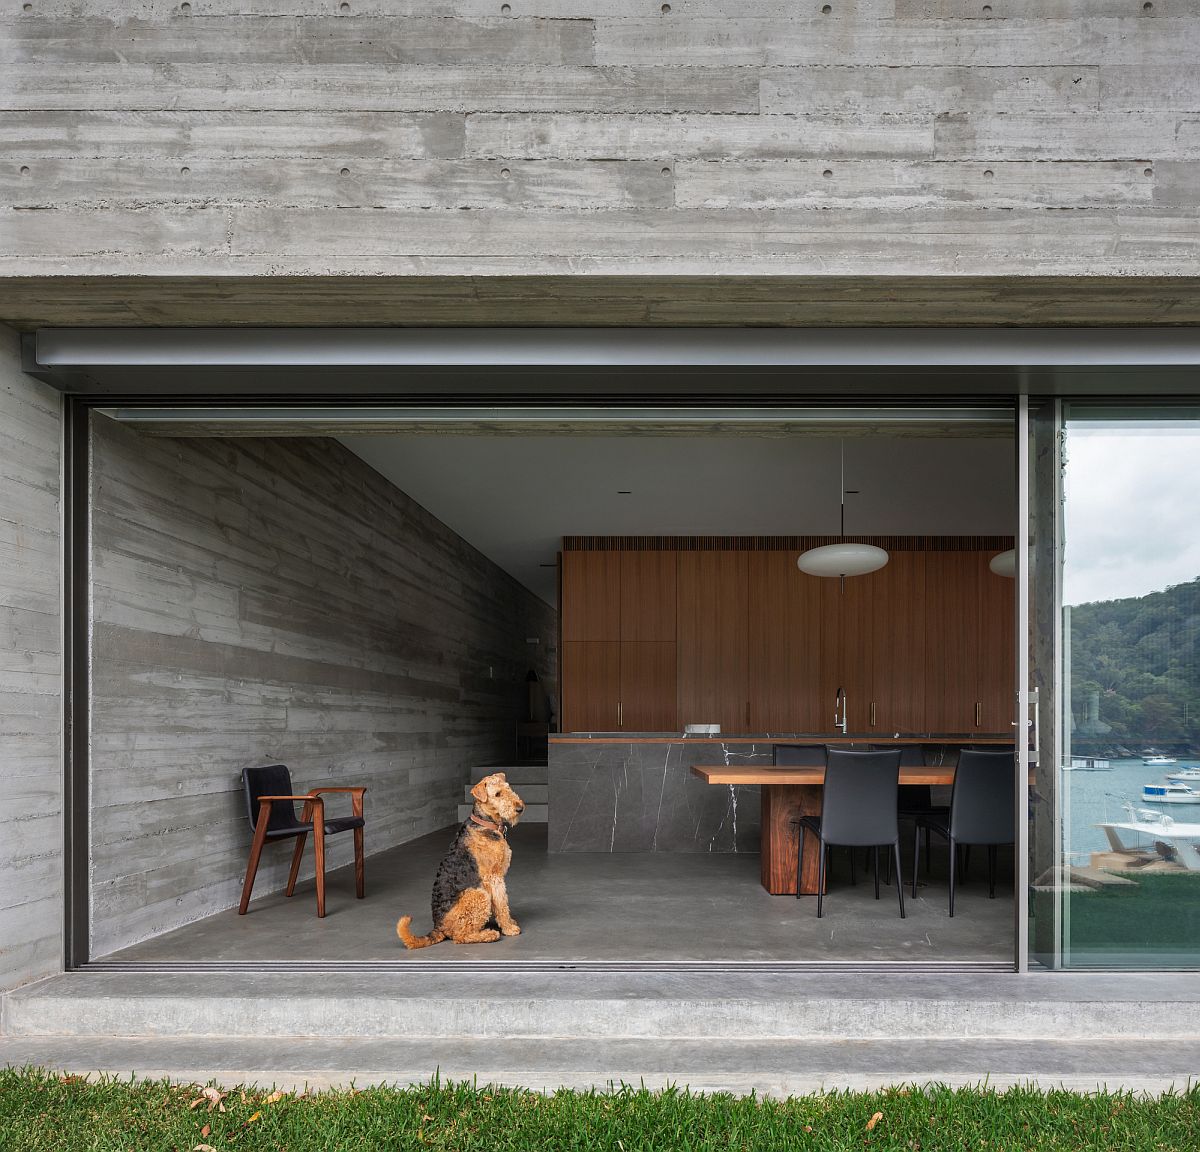 Exposed-concrete-walls-shape-the-interior-of-the-house-with-sliding-glass-walls-connecting-it-to-th-exterior-70219